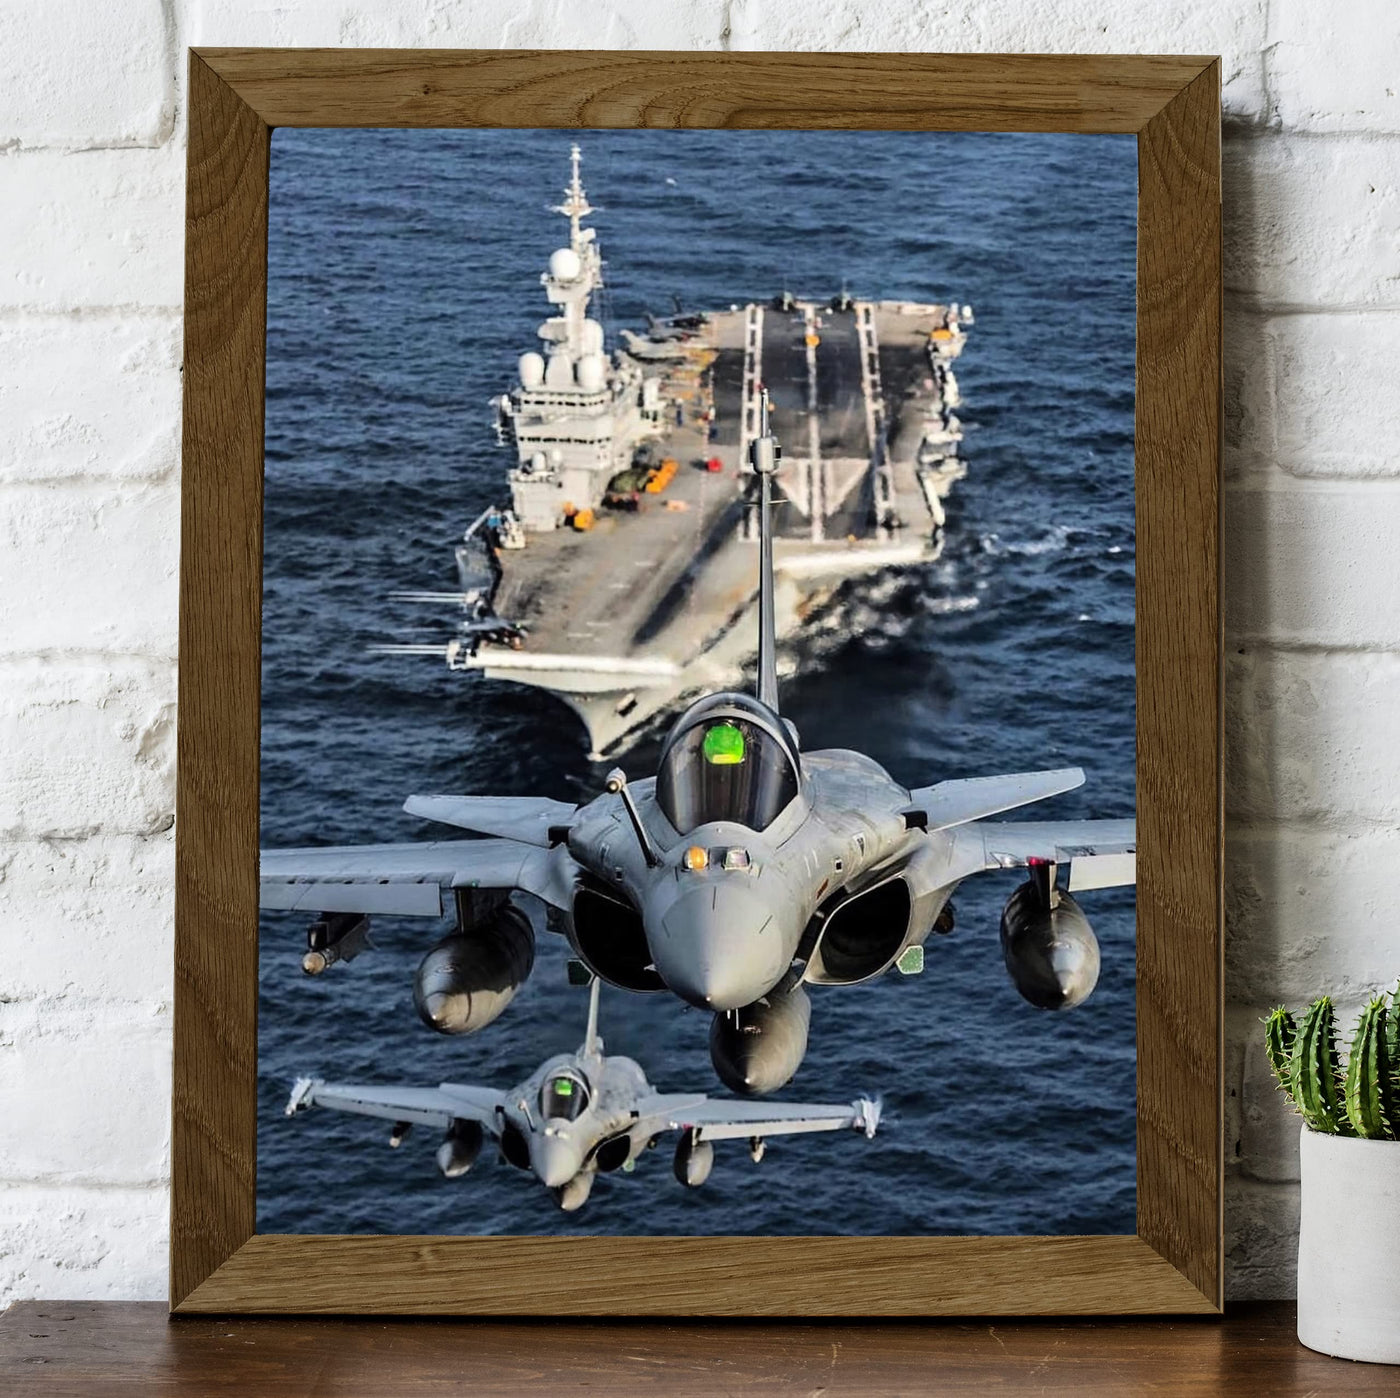 Dassault Rafale Taking Off From Aircraft Carrier -French Fighter Jet Print -8x10" Military Plane Wall Decor -Ready to Frame. Home-Office-School Decor. Perfect Sign for Game Room-Garage-Cave Decor!